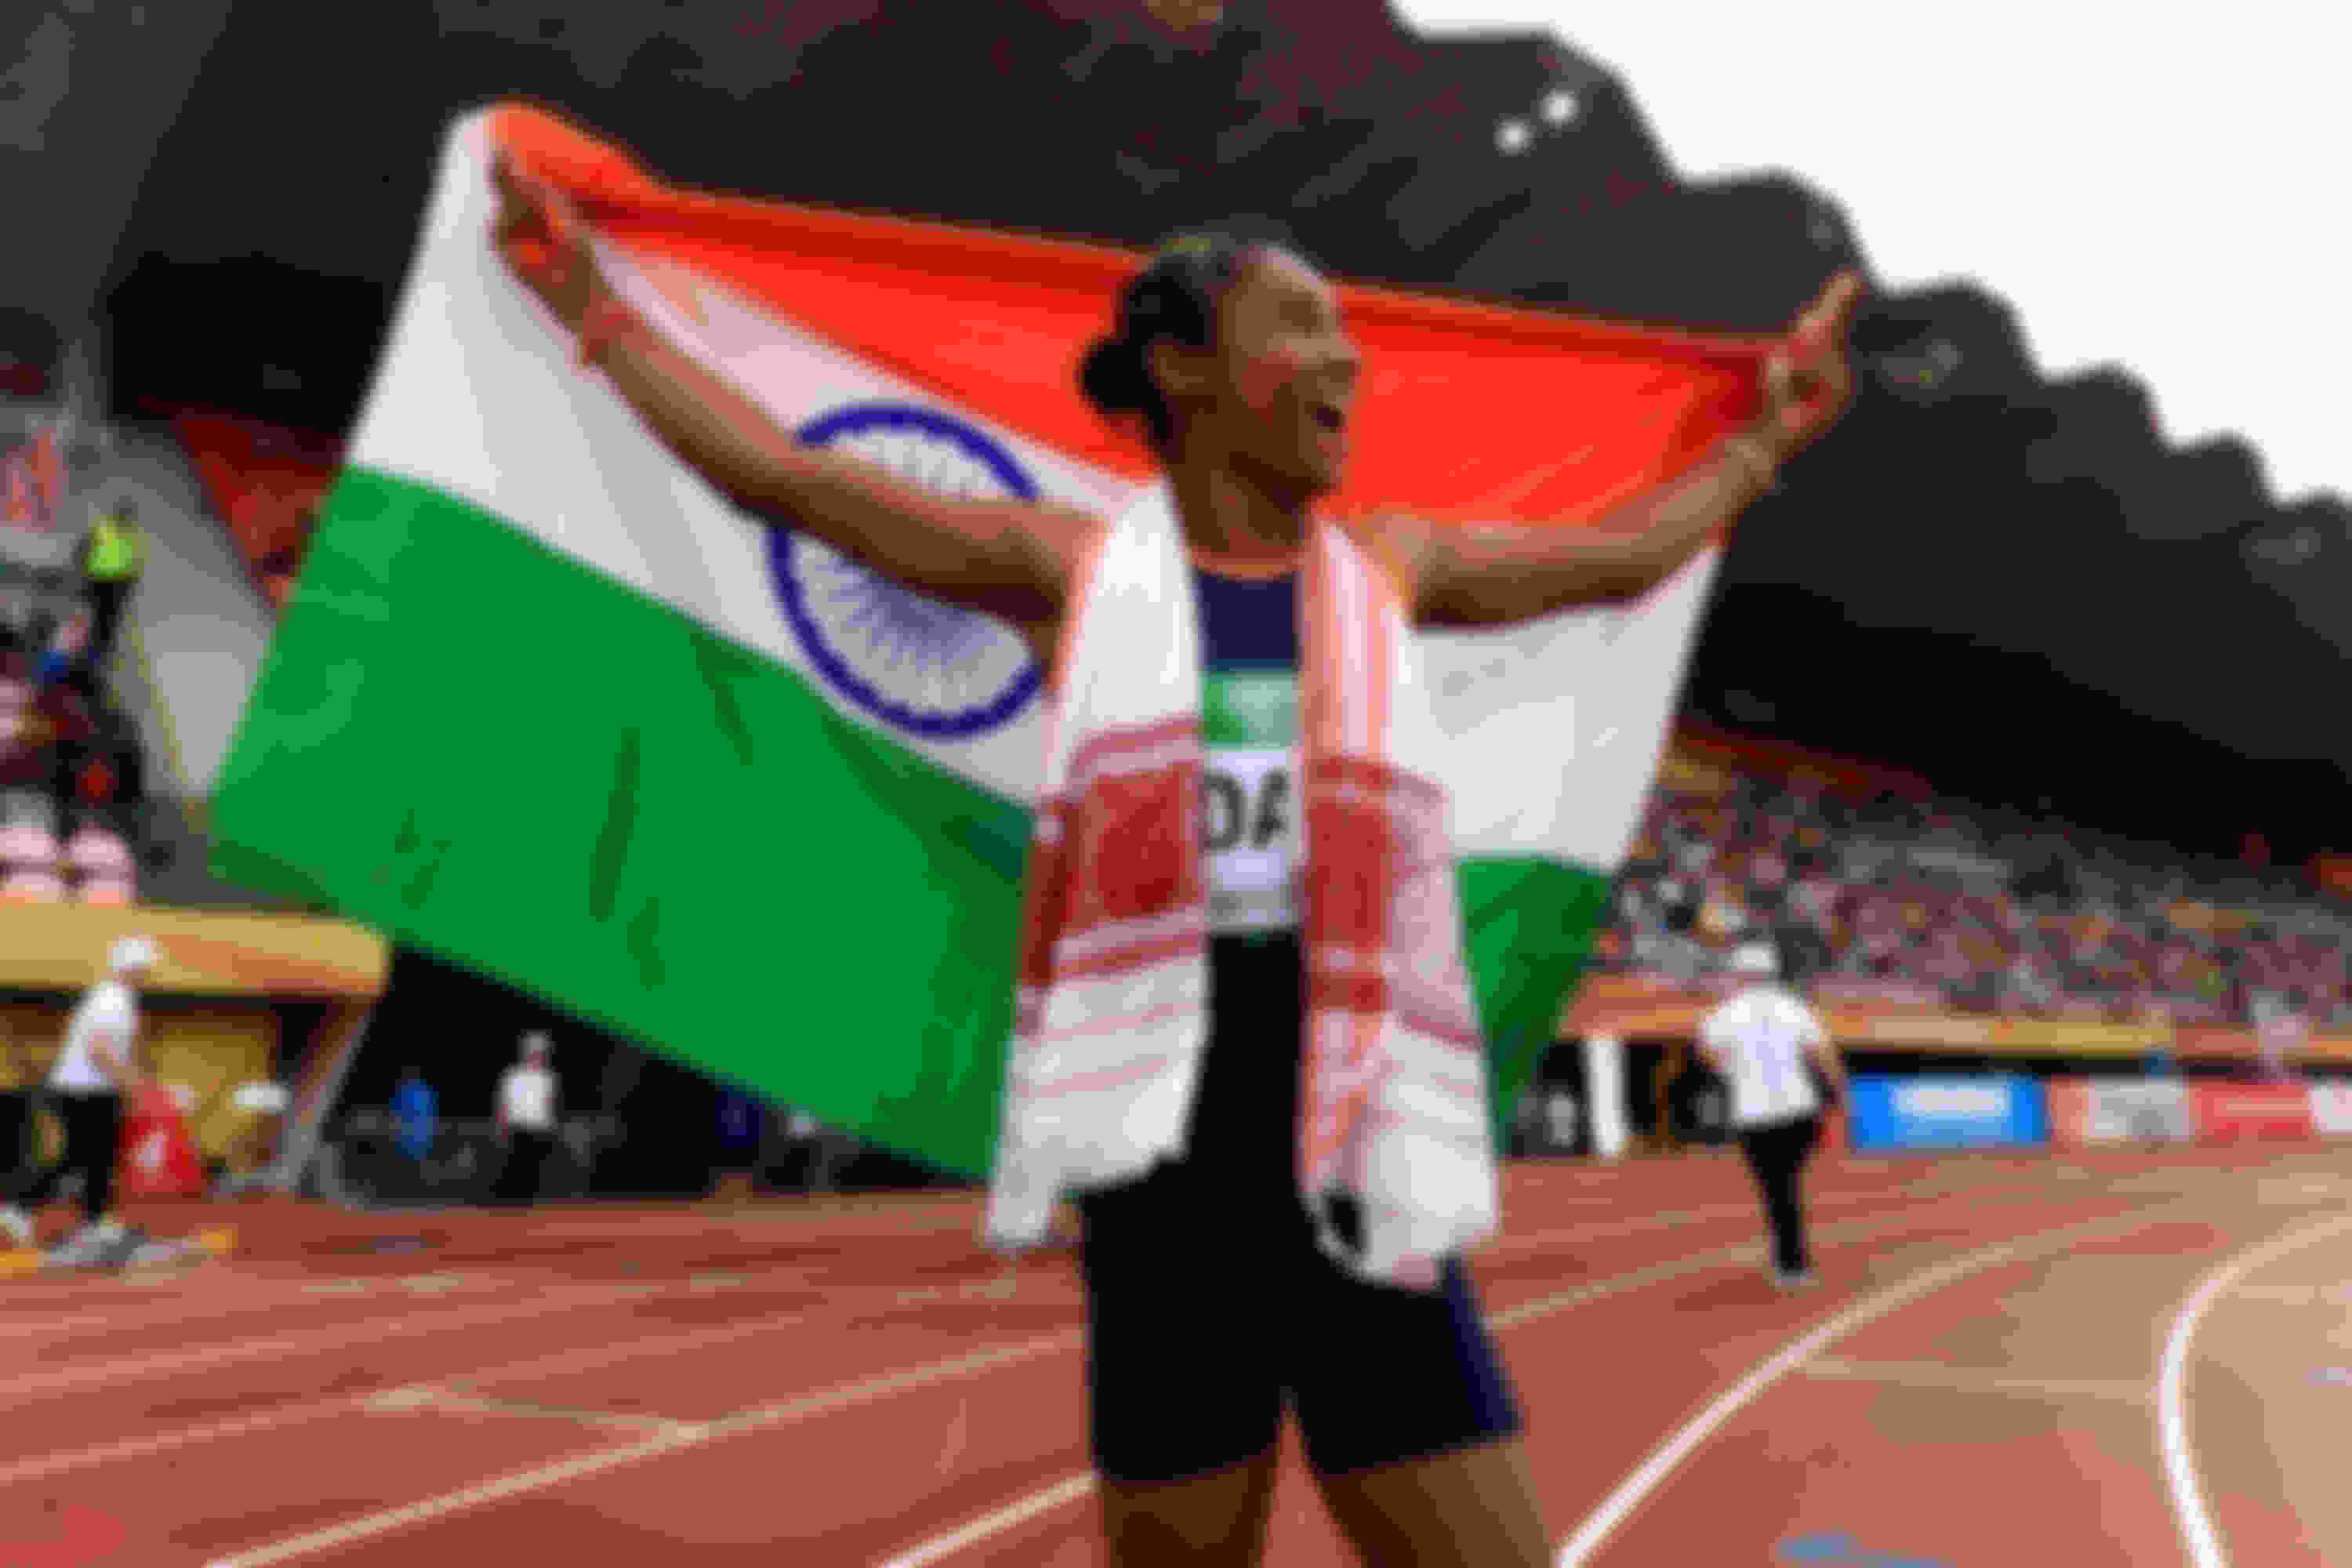 Hima Das was to compete at the 2019 World athletics championships in Doha, when a back injury ruled her out.